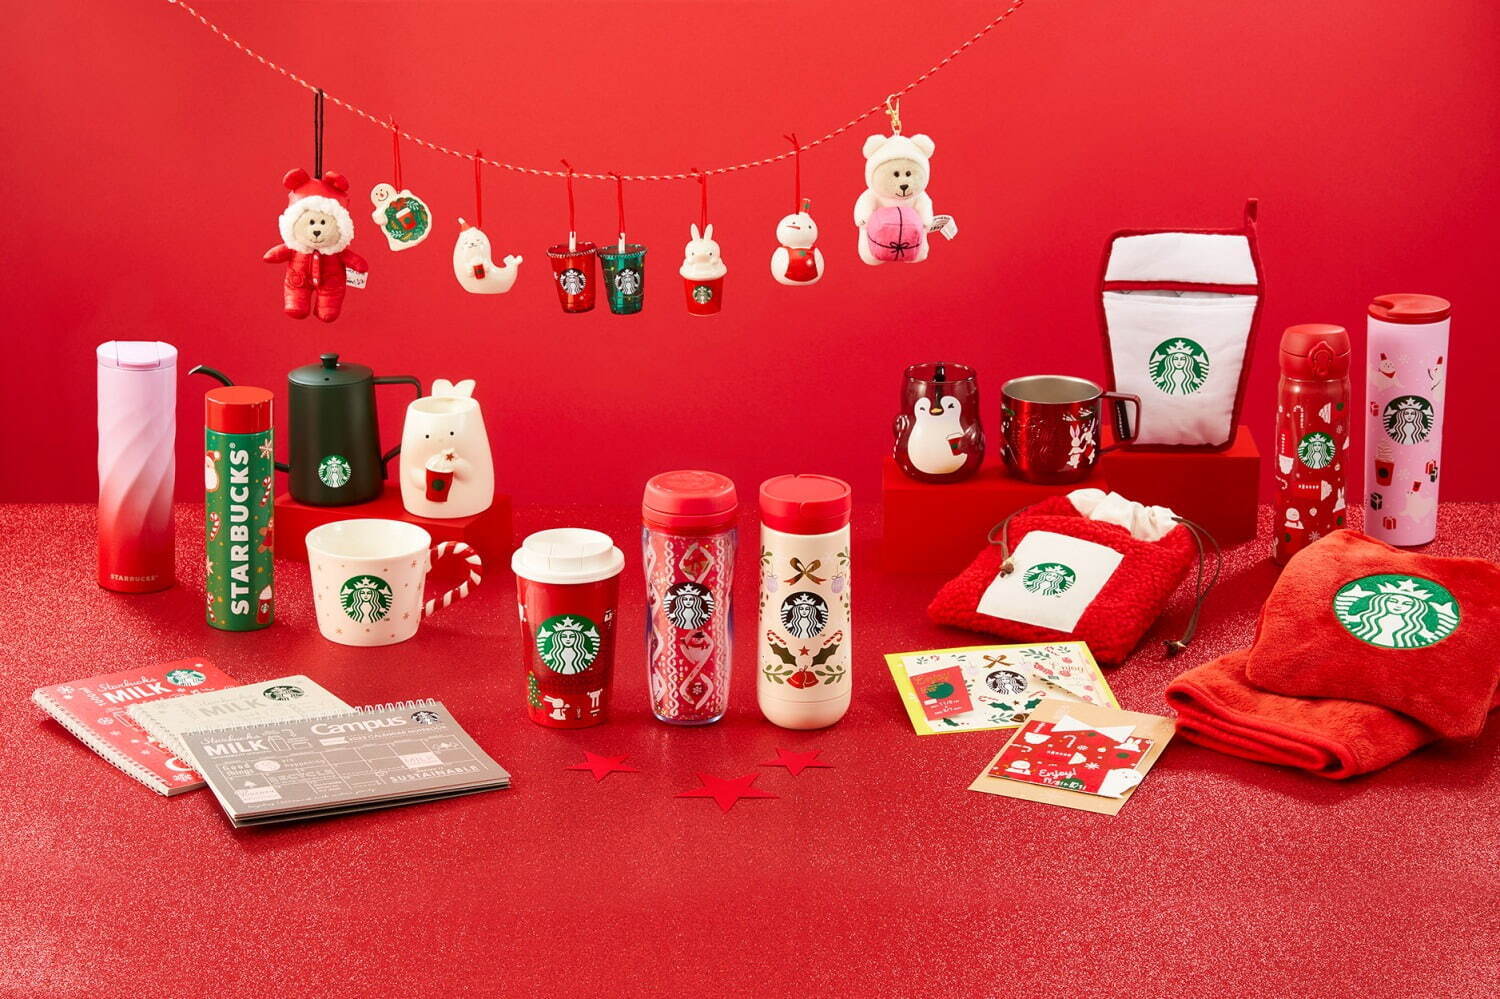 Collect Starbucks Holiday Merchandise from Japan Buyandship SG Shop